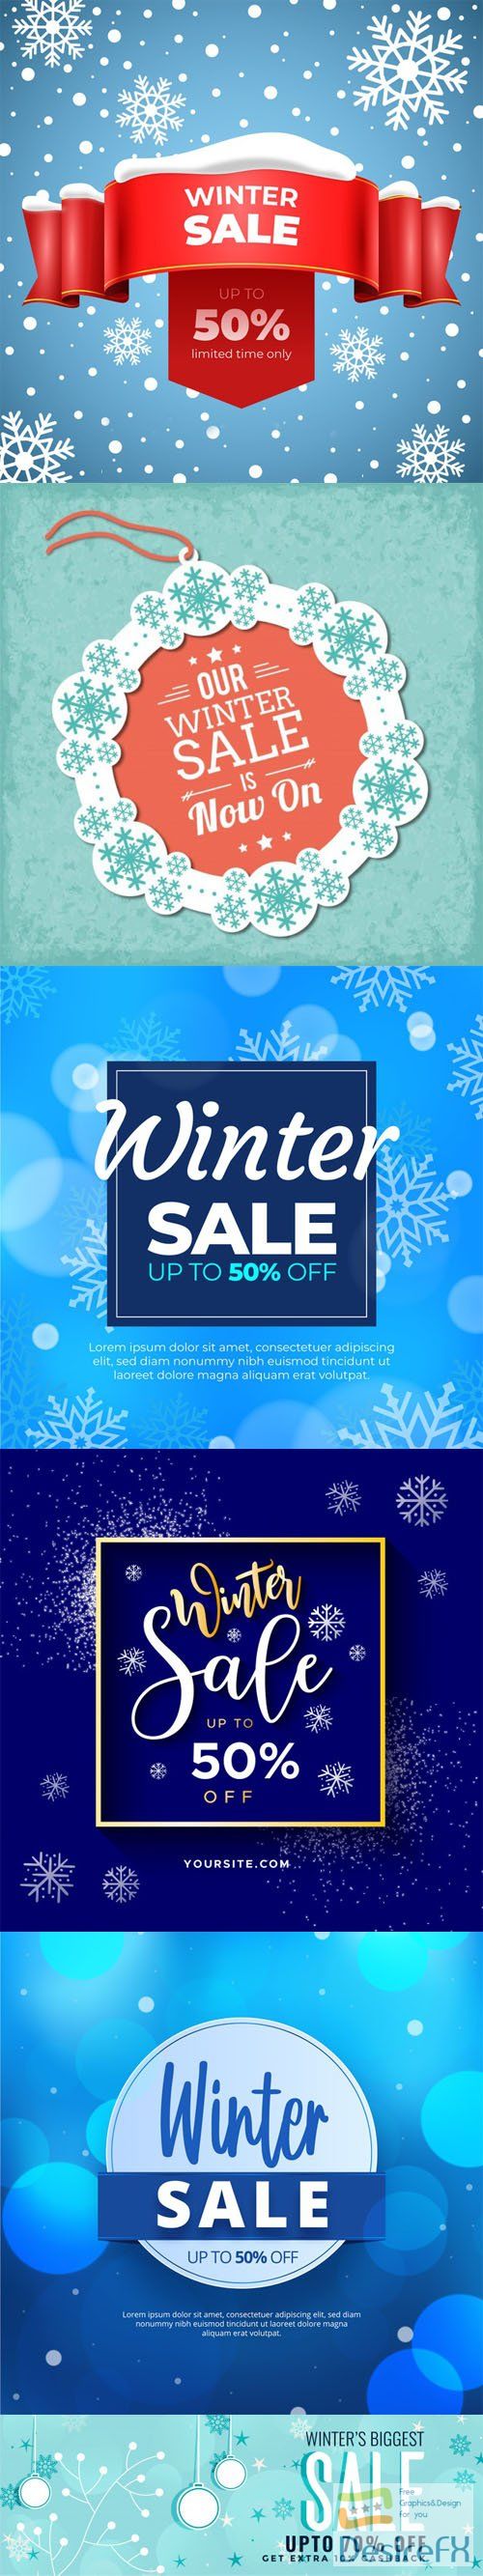 6 Winter Sales Vector Templates Collection